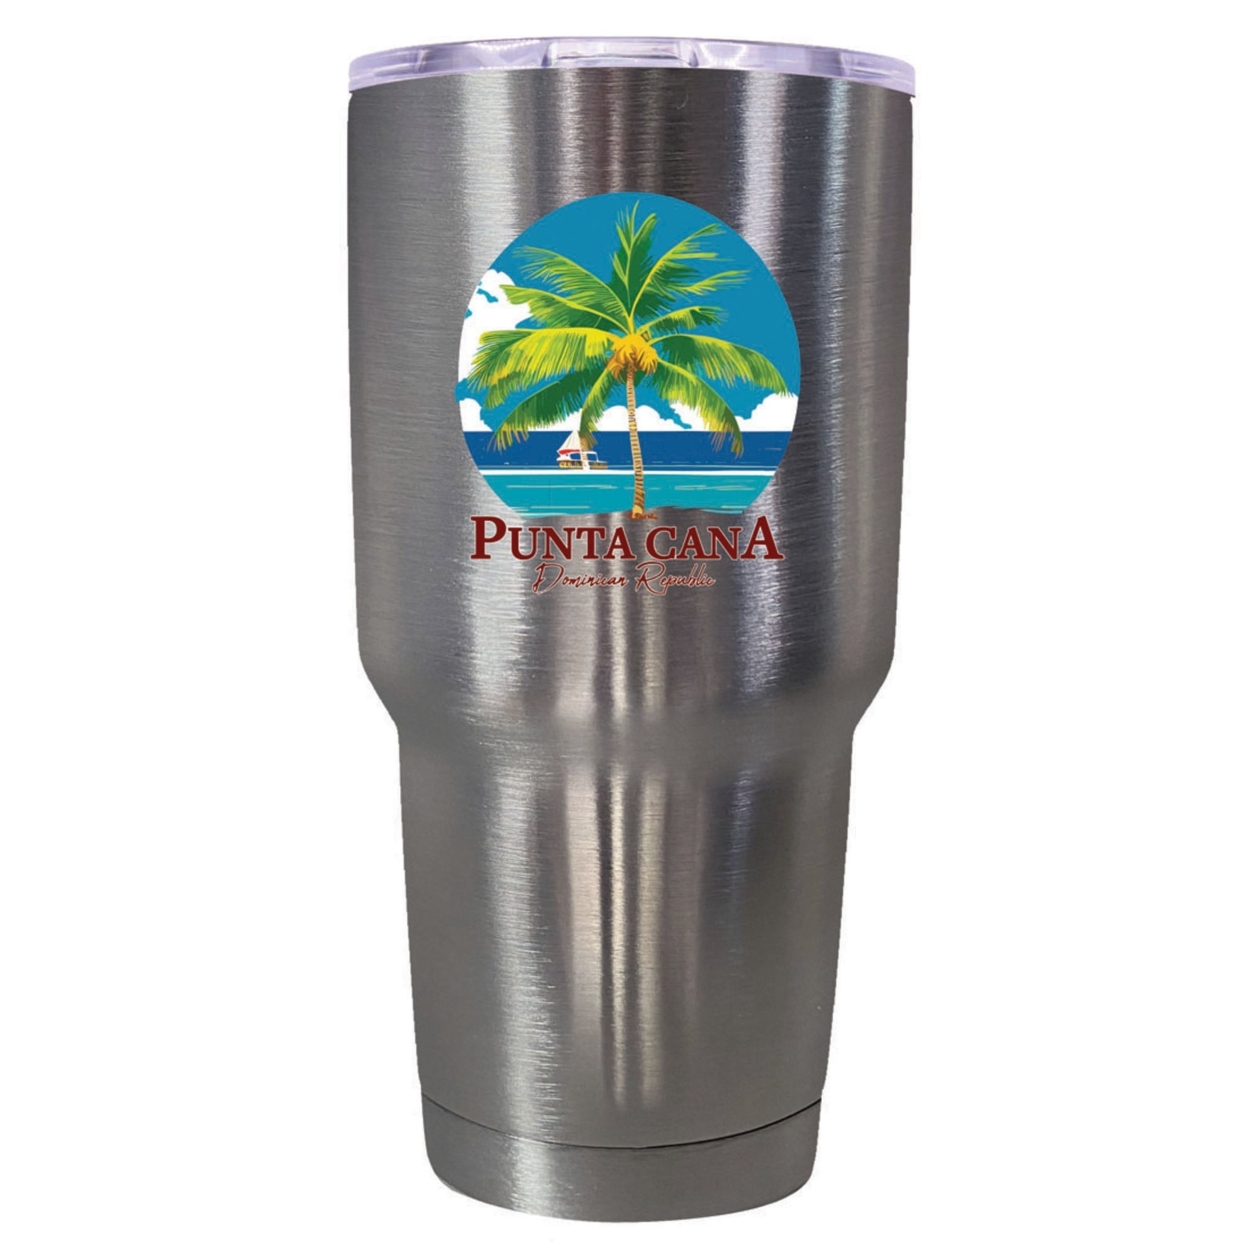 Punta Cana Dominican Republic Souvenir 24 Oz Insulated Stainless Steel Tumbler - Rose Gold, PARROT